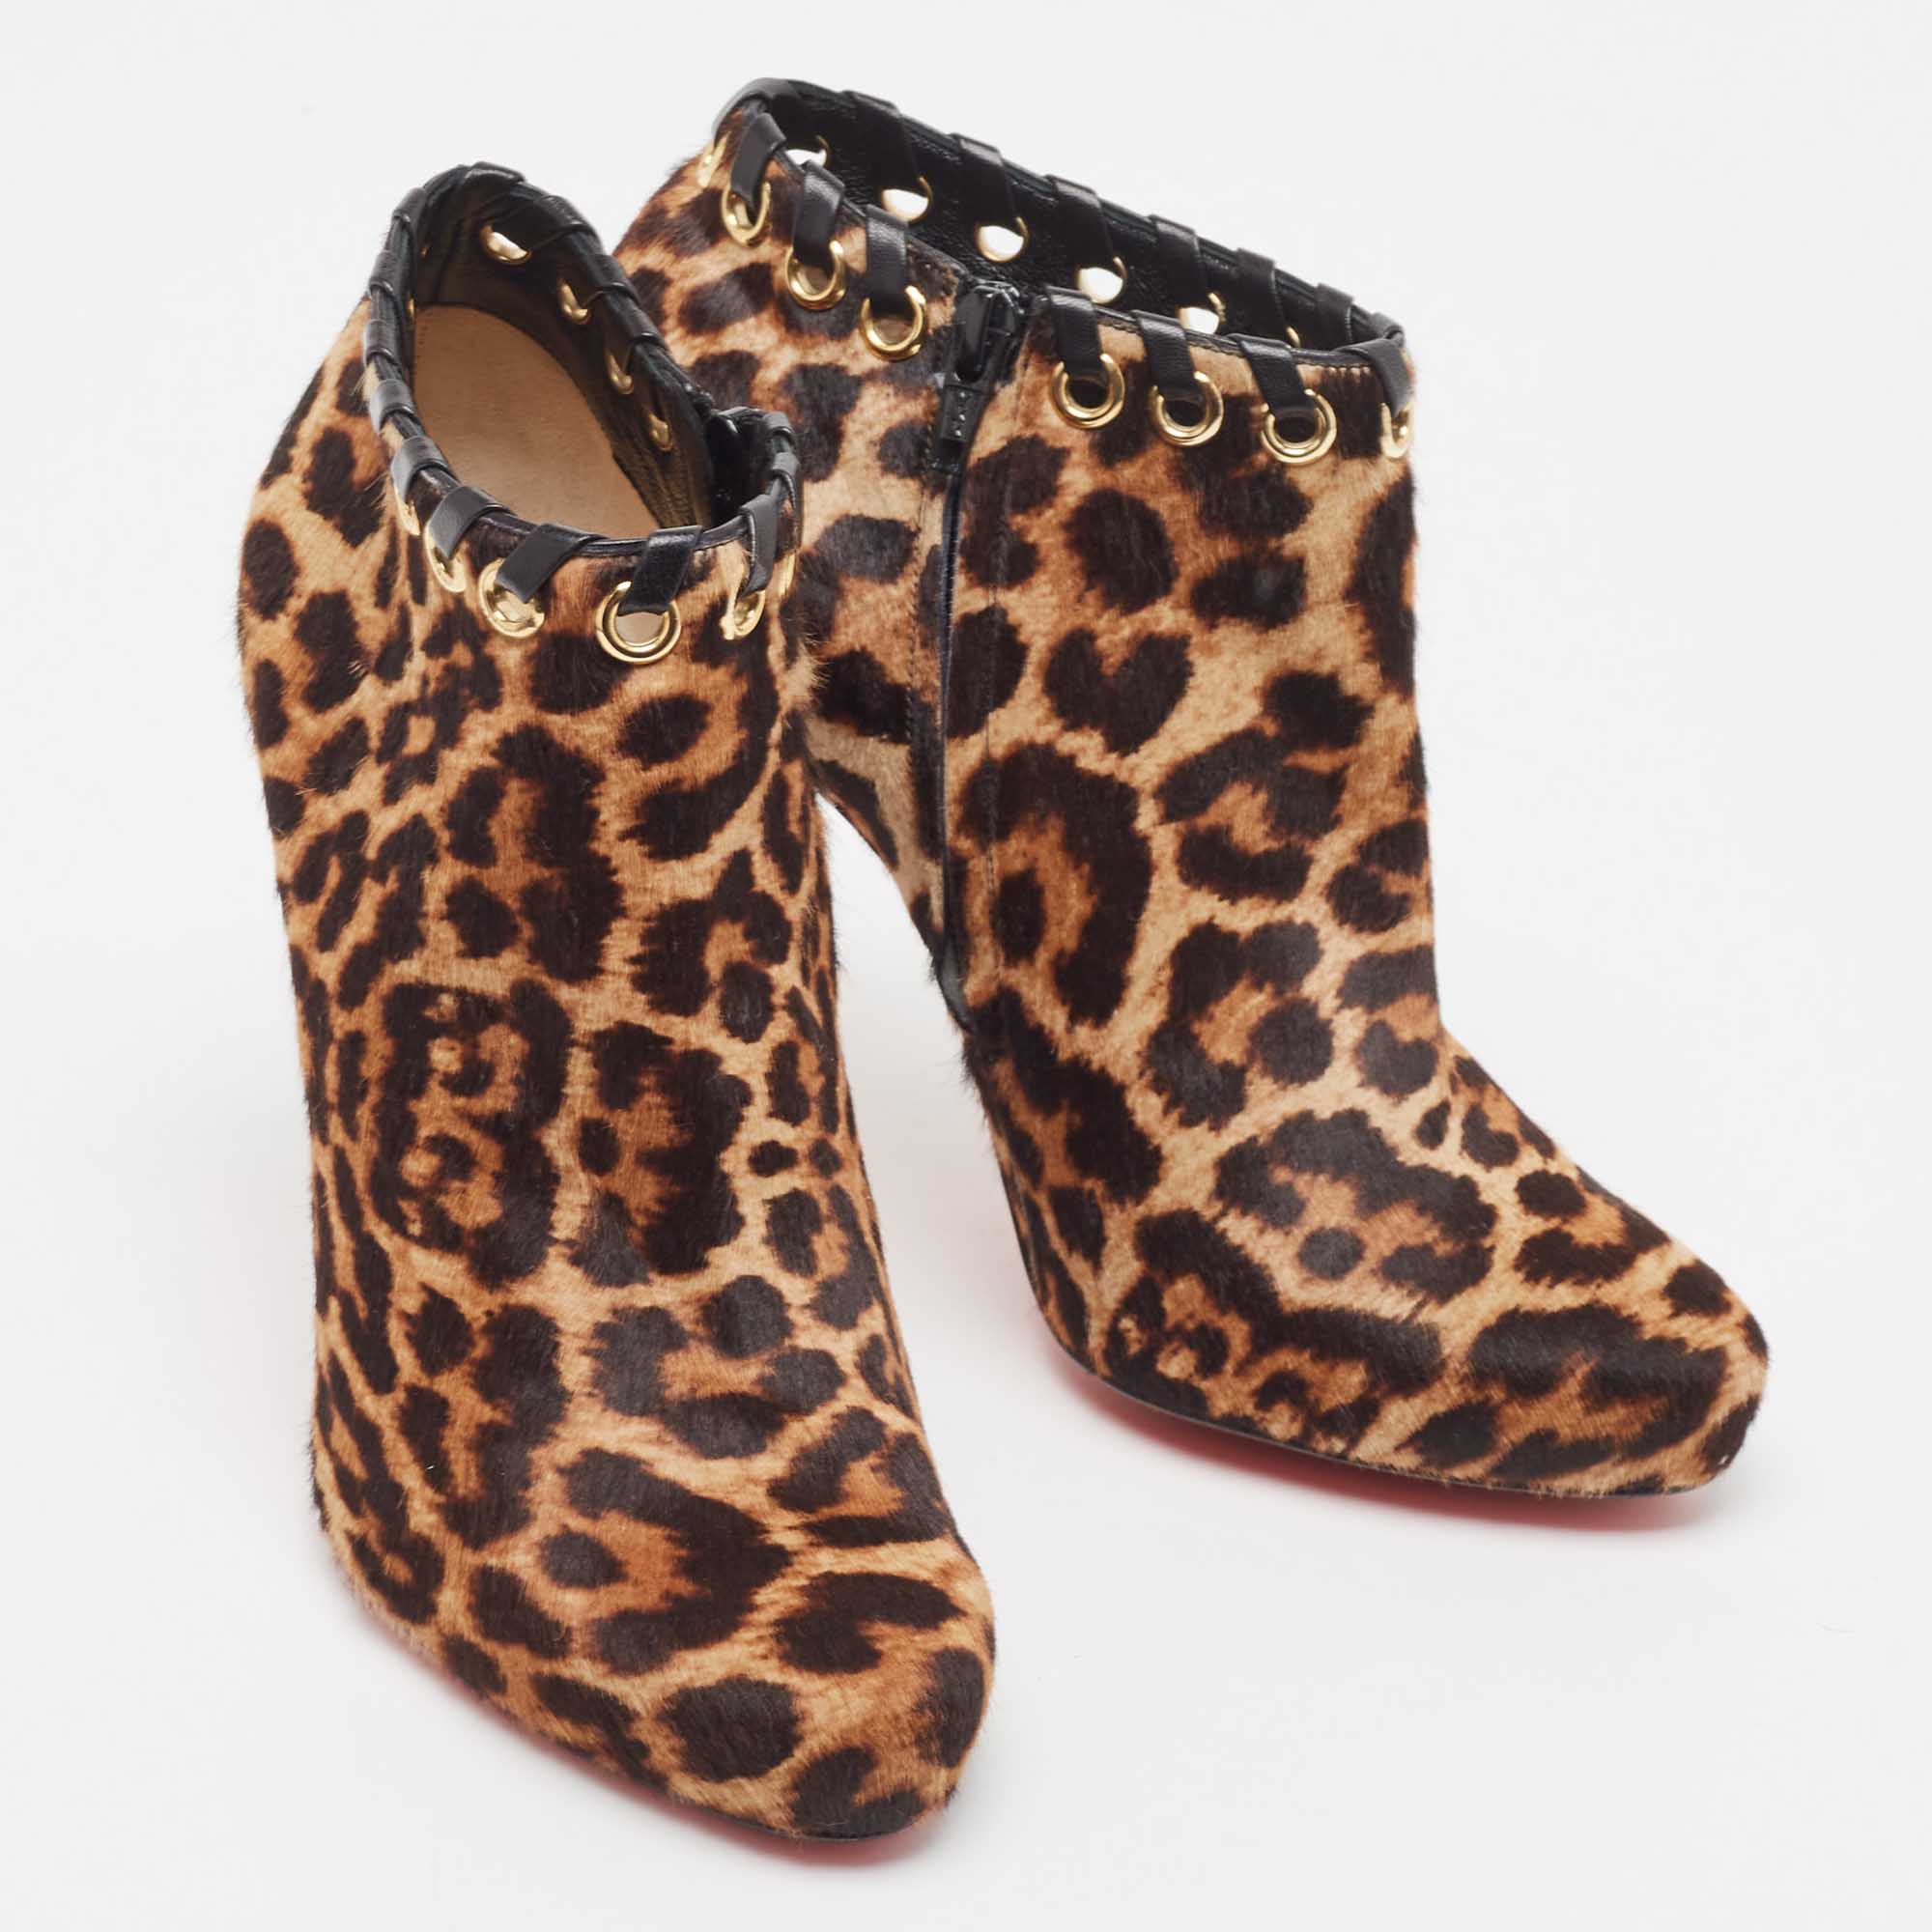 Christian Louboutin Brown/Beige Leopard Print Calf Hair Ankle Booties Size 38.5